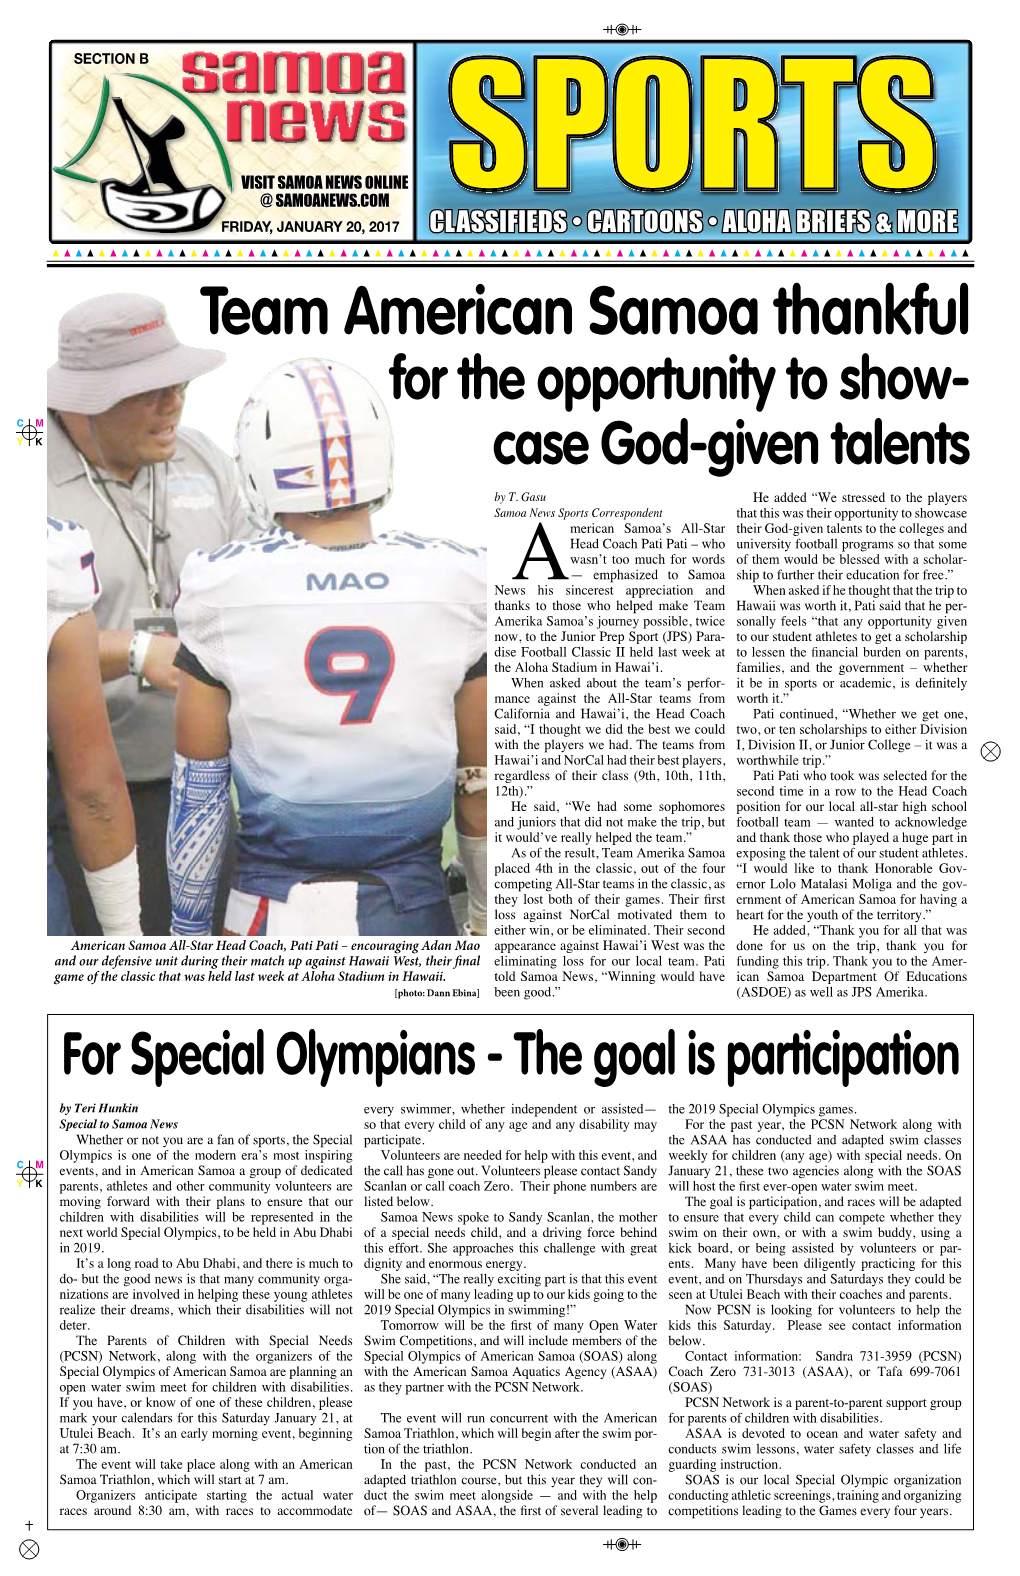 Team American Samoa Thankful for the Opportunity to Show- C M Y K Case God-Given Talents